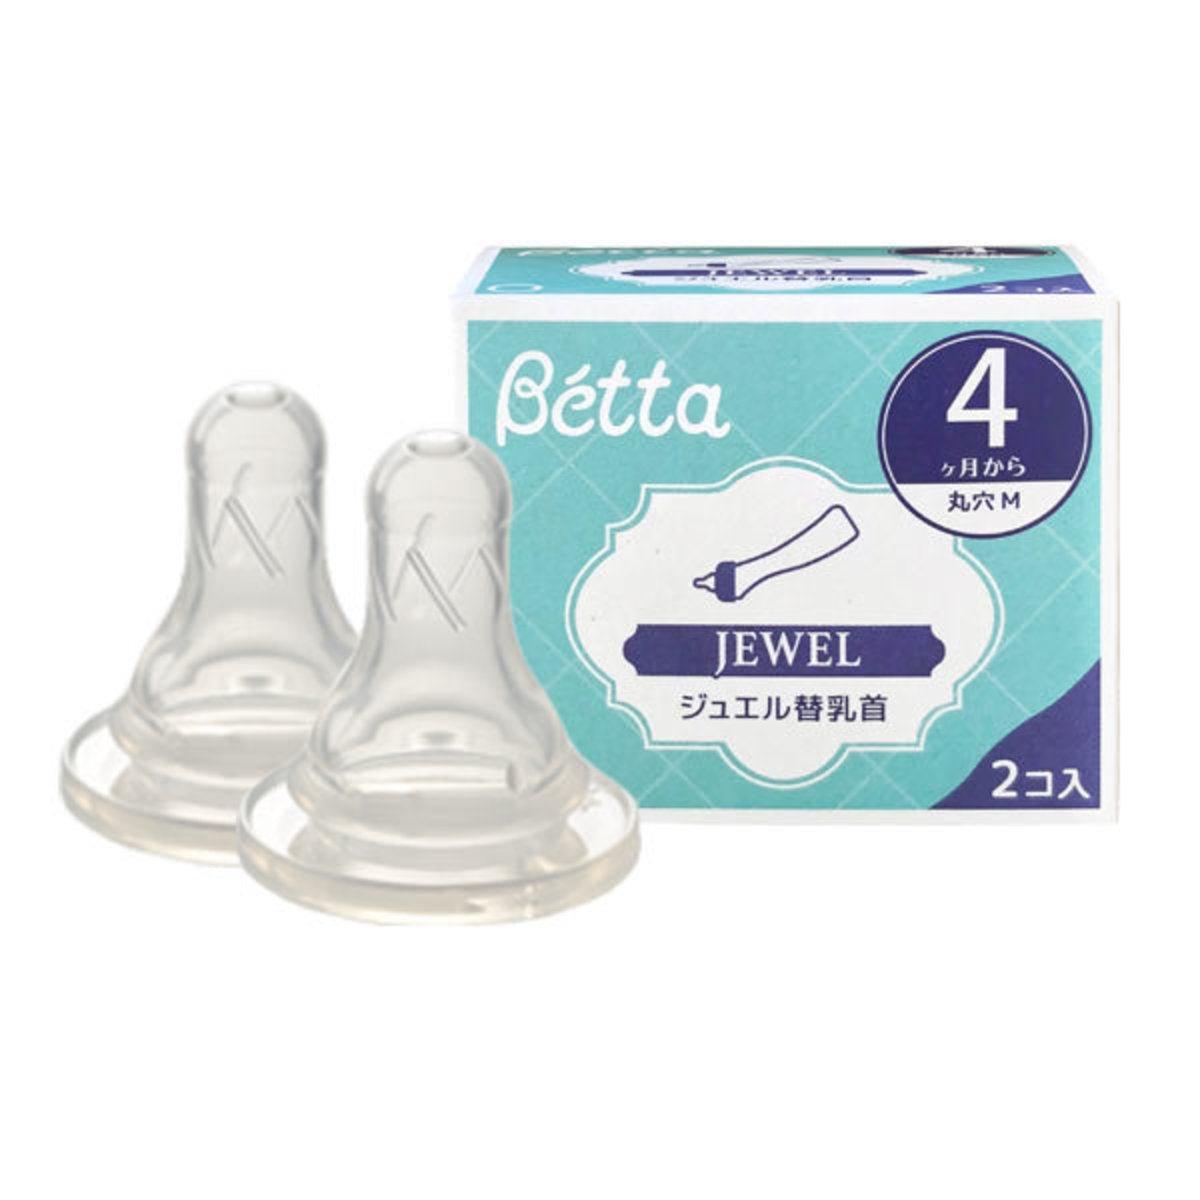 Japan Betta Jewel BB-BPNPJW Series Replacement Pacifier Set Round Hole M Code Cross Hole 1 box of 2 pieces 4~6 Months and Above - CHL-STORE 